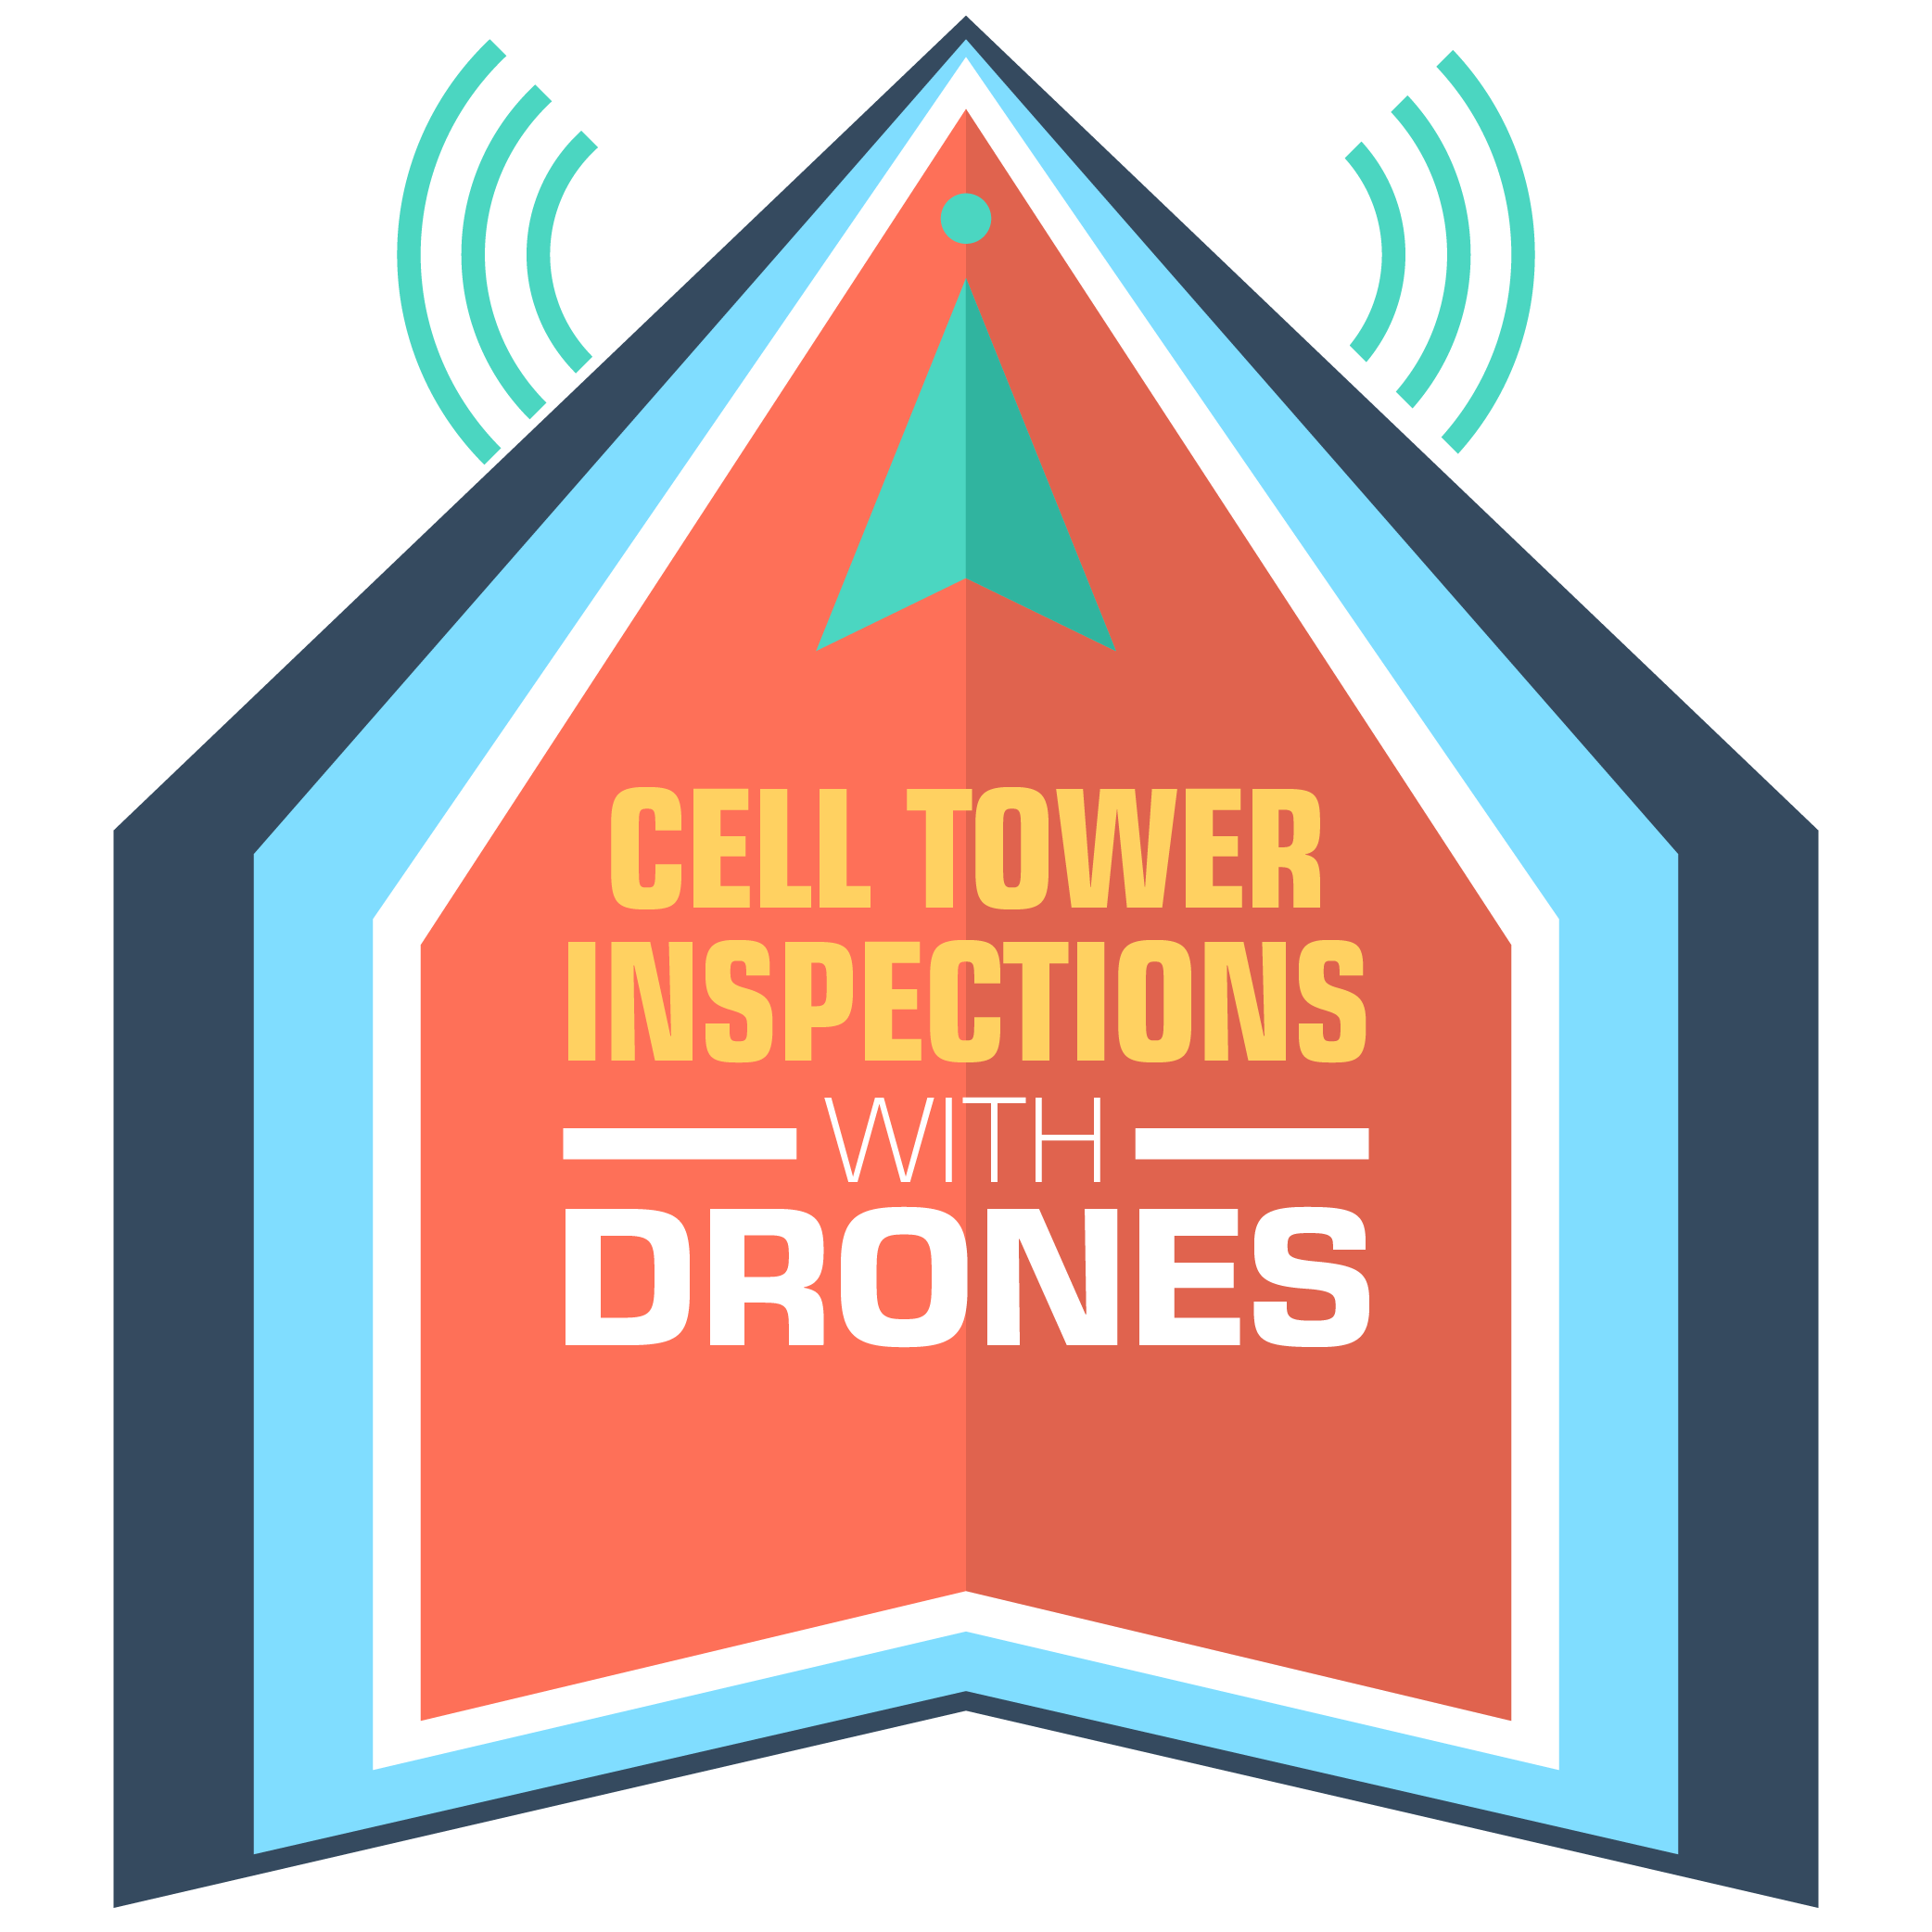 Cell Tower Inspections With Drones